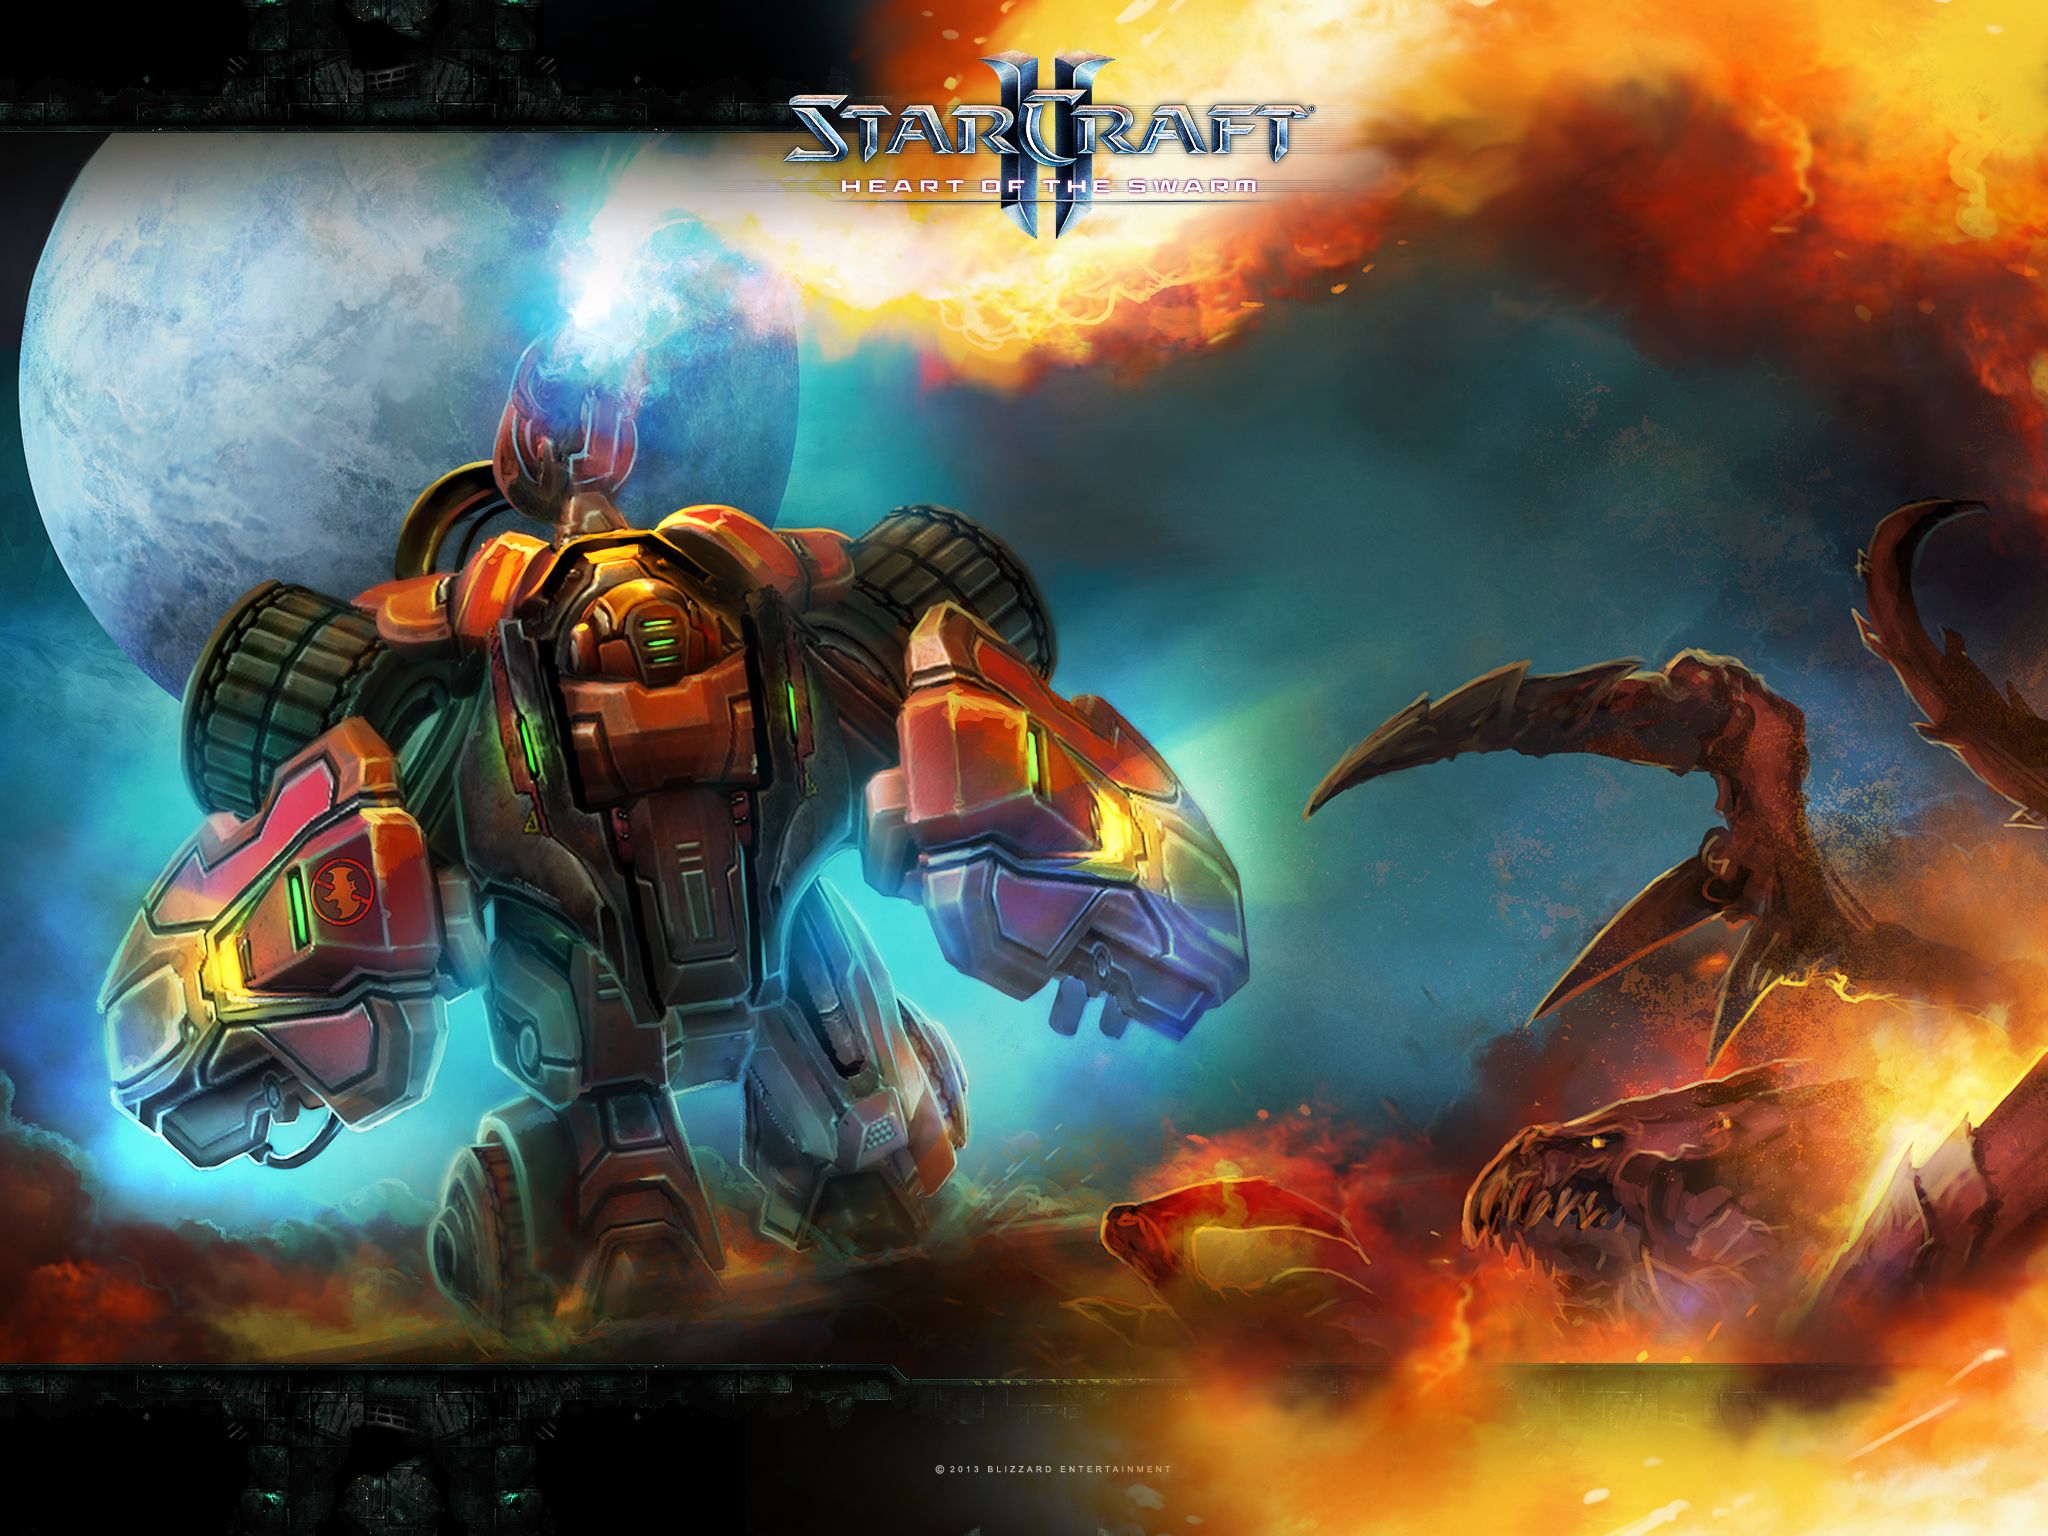 Video Game StarCraft II: Heart of the Swarm HD Wallpaper | Background Image